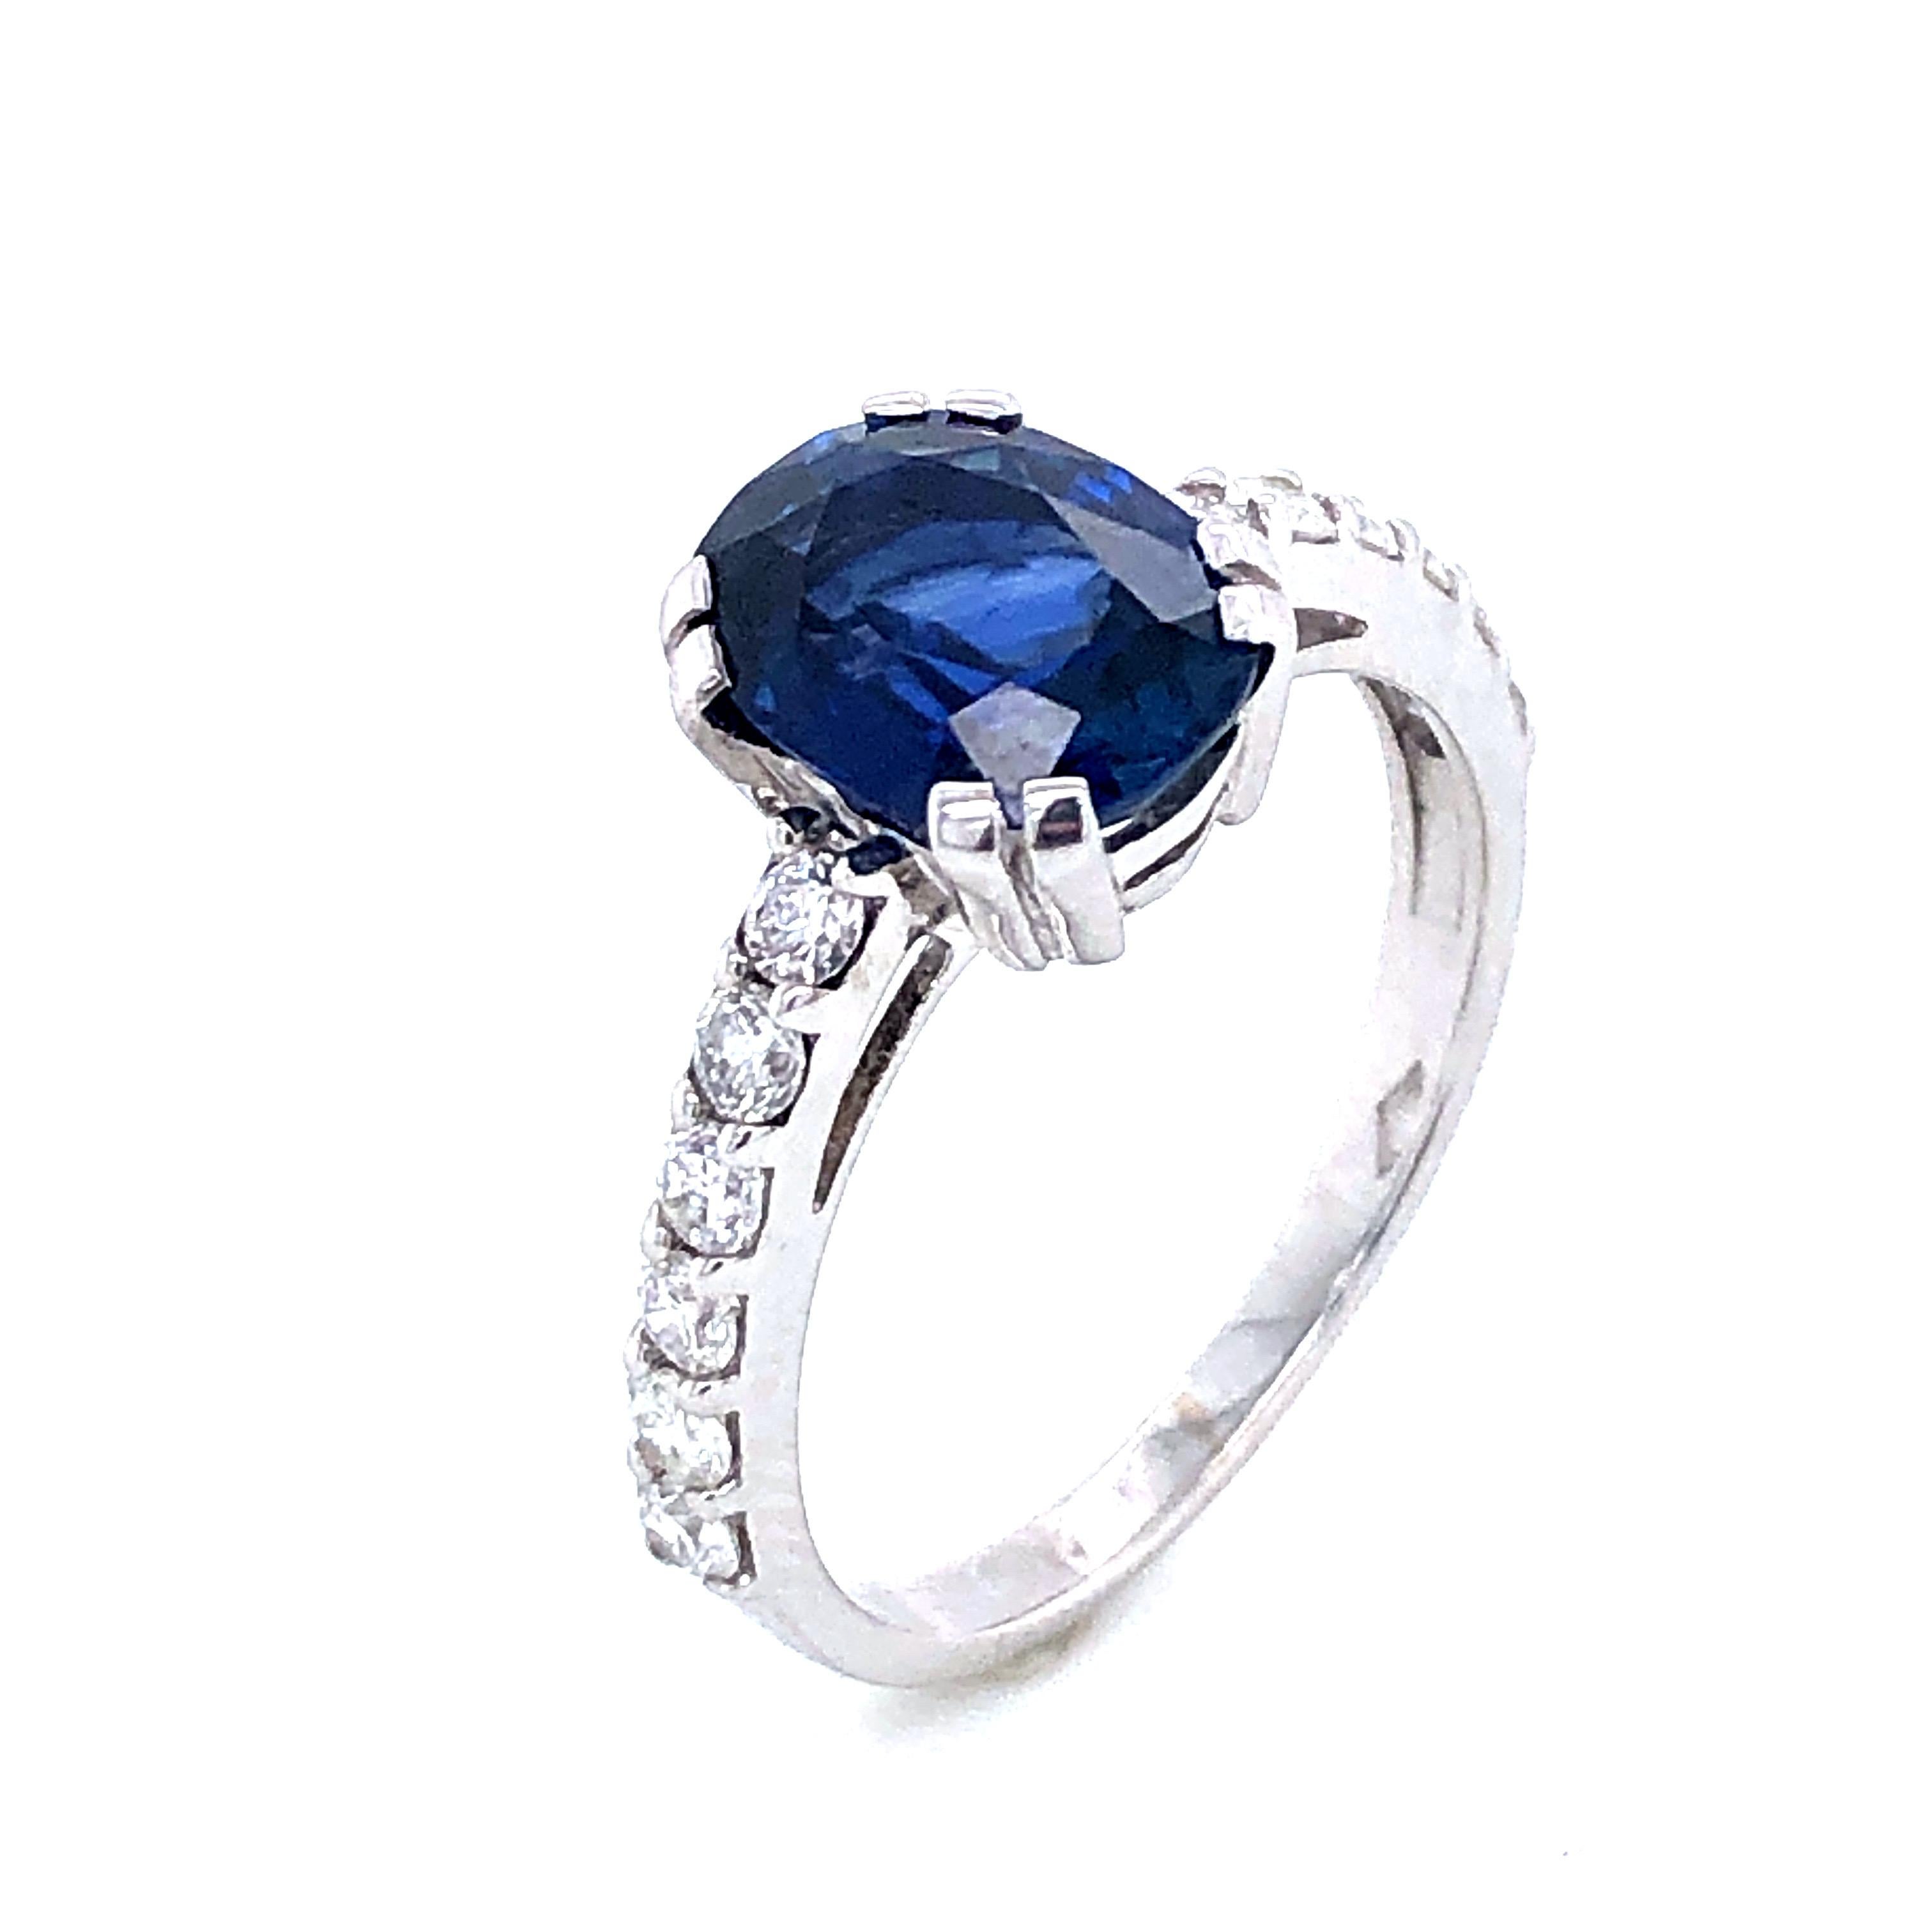 Blue Sapphire and Diamonds White Gold 18. k Ring
Blue Sapphire Form C 2,38 Carat 
12 Diamonds Color H 0.48 Carat
French Size : 54
US Size : 6 3/4
British Size :  N